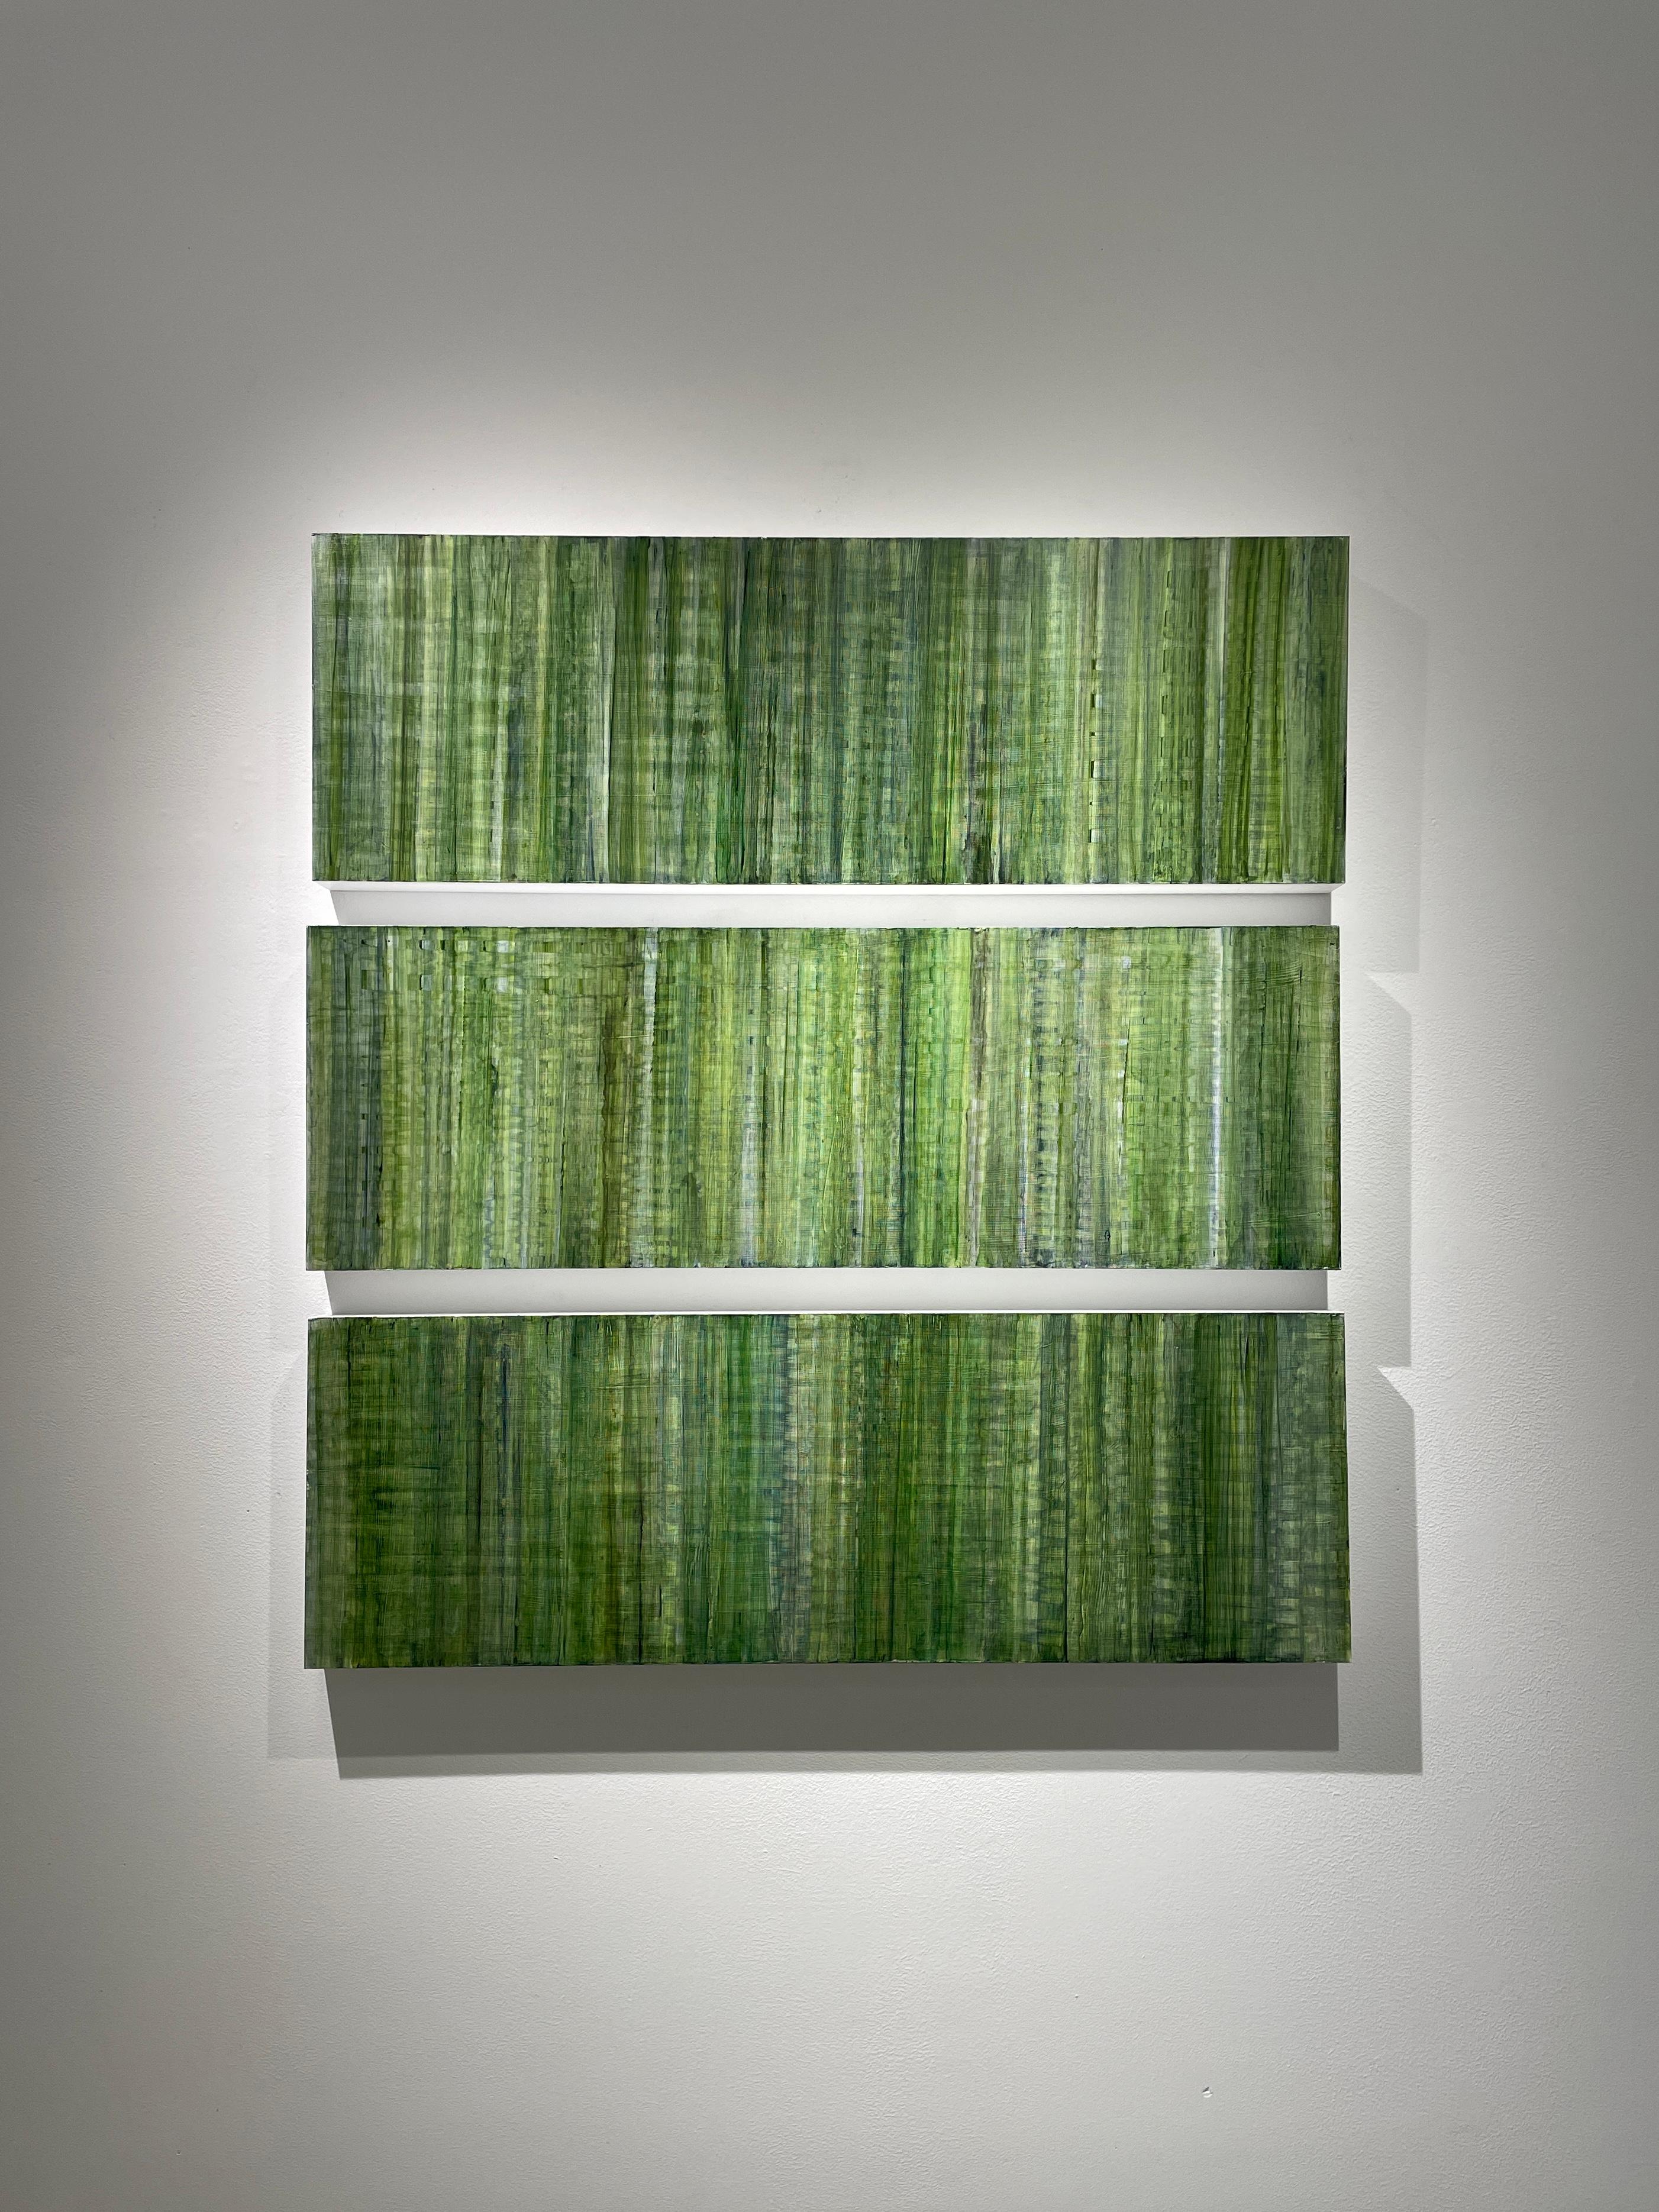 C22-9 (Abstract Geometric Color Field Multi panel painting in shades of green) by Ginny Fox
Painting is on three panels measuring 36 x 12 x 2 inches each
Can be oriented vertically or horizontally

At once minimal and complex, the abstract